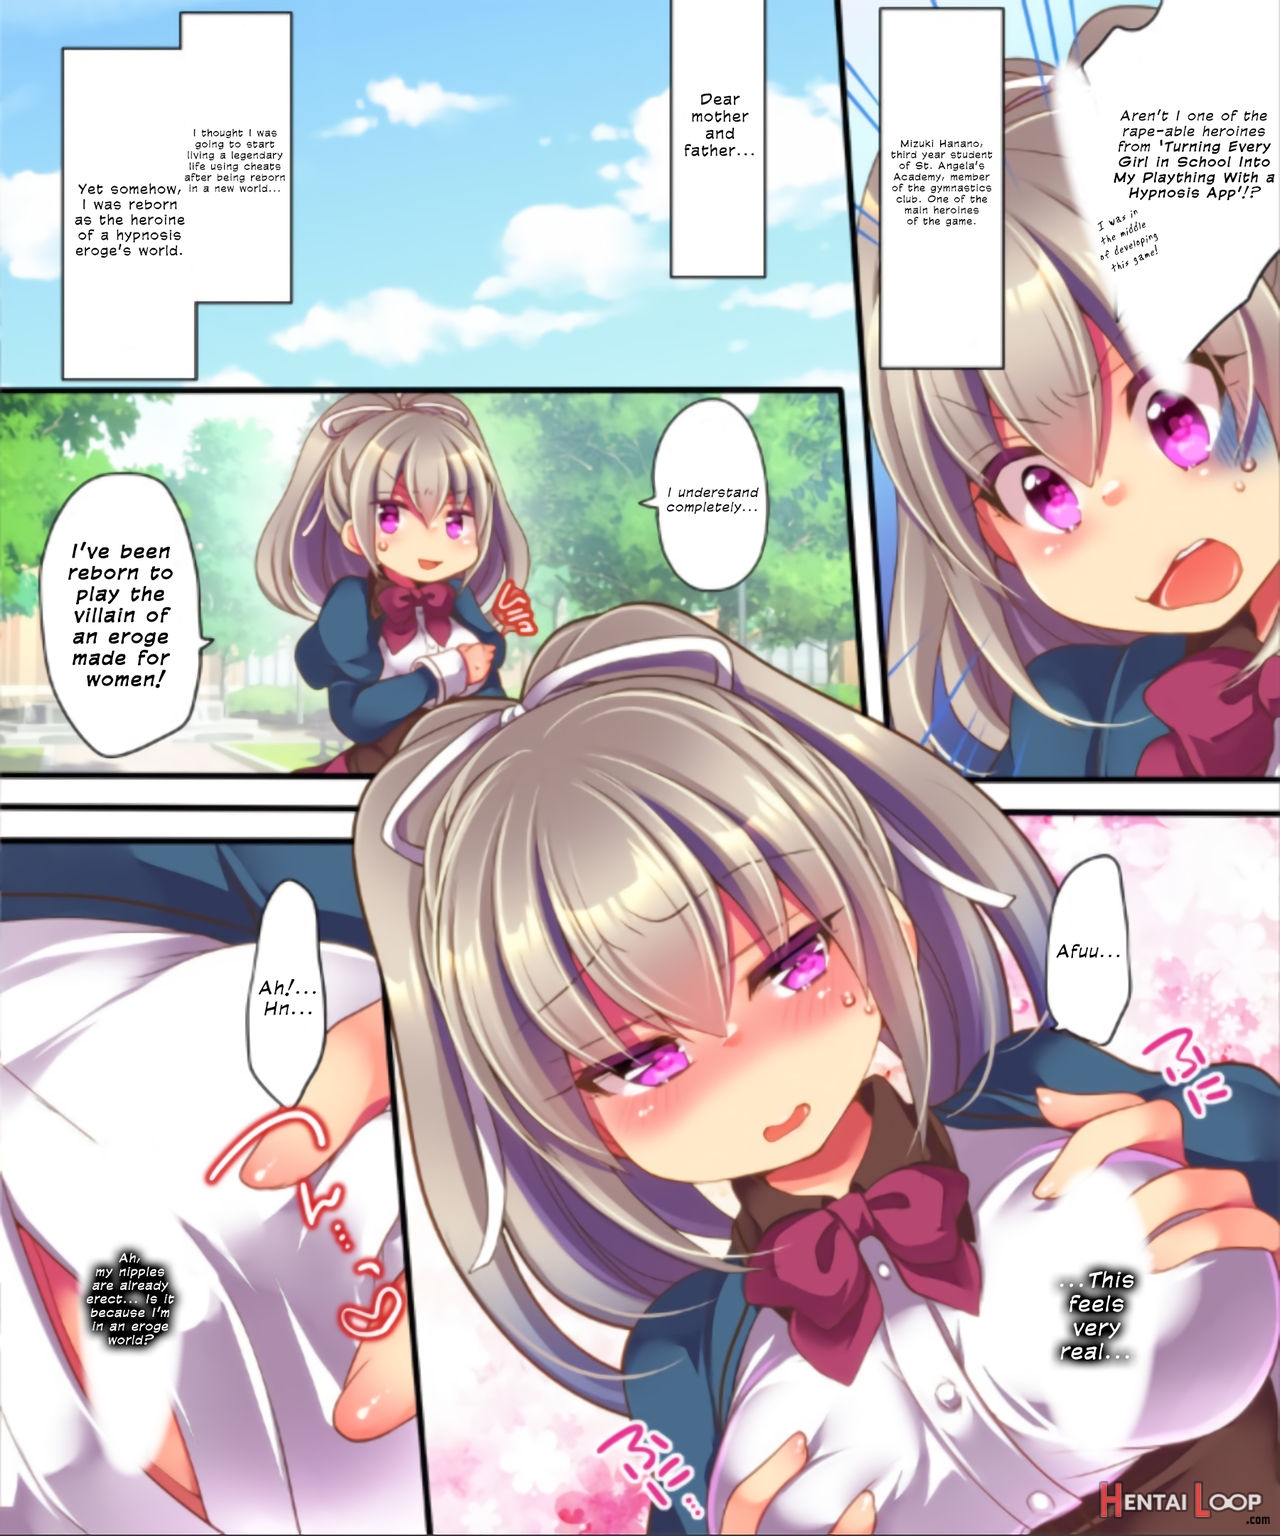 Reborn As A Heroine In A Hypnosis Mindbreak Eroge: I Need To Get Out Of Here Before I Get Raped! page 8